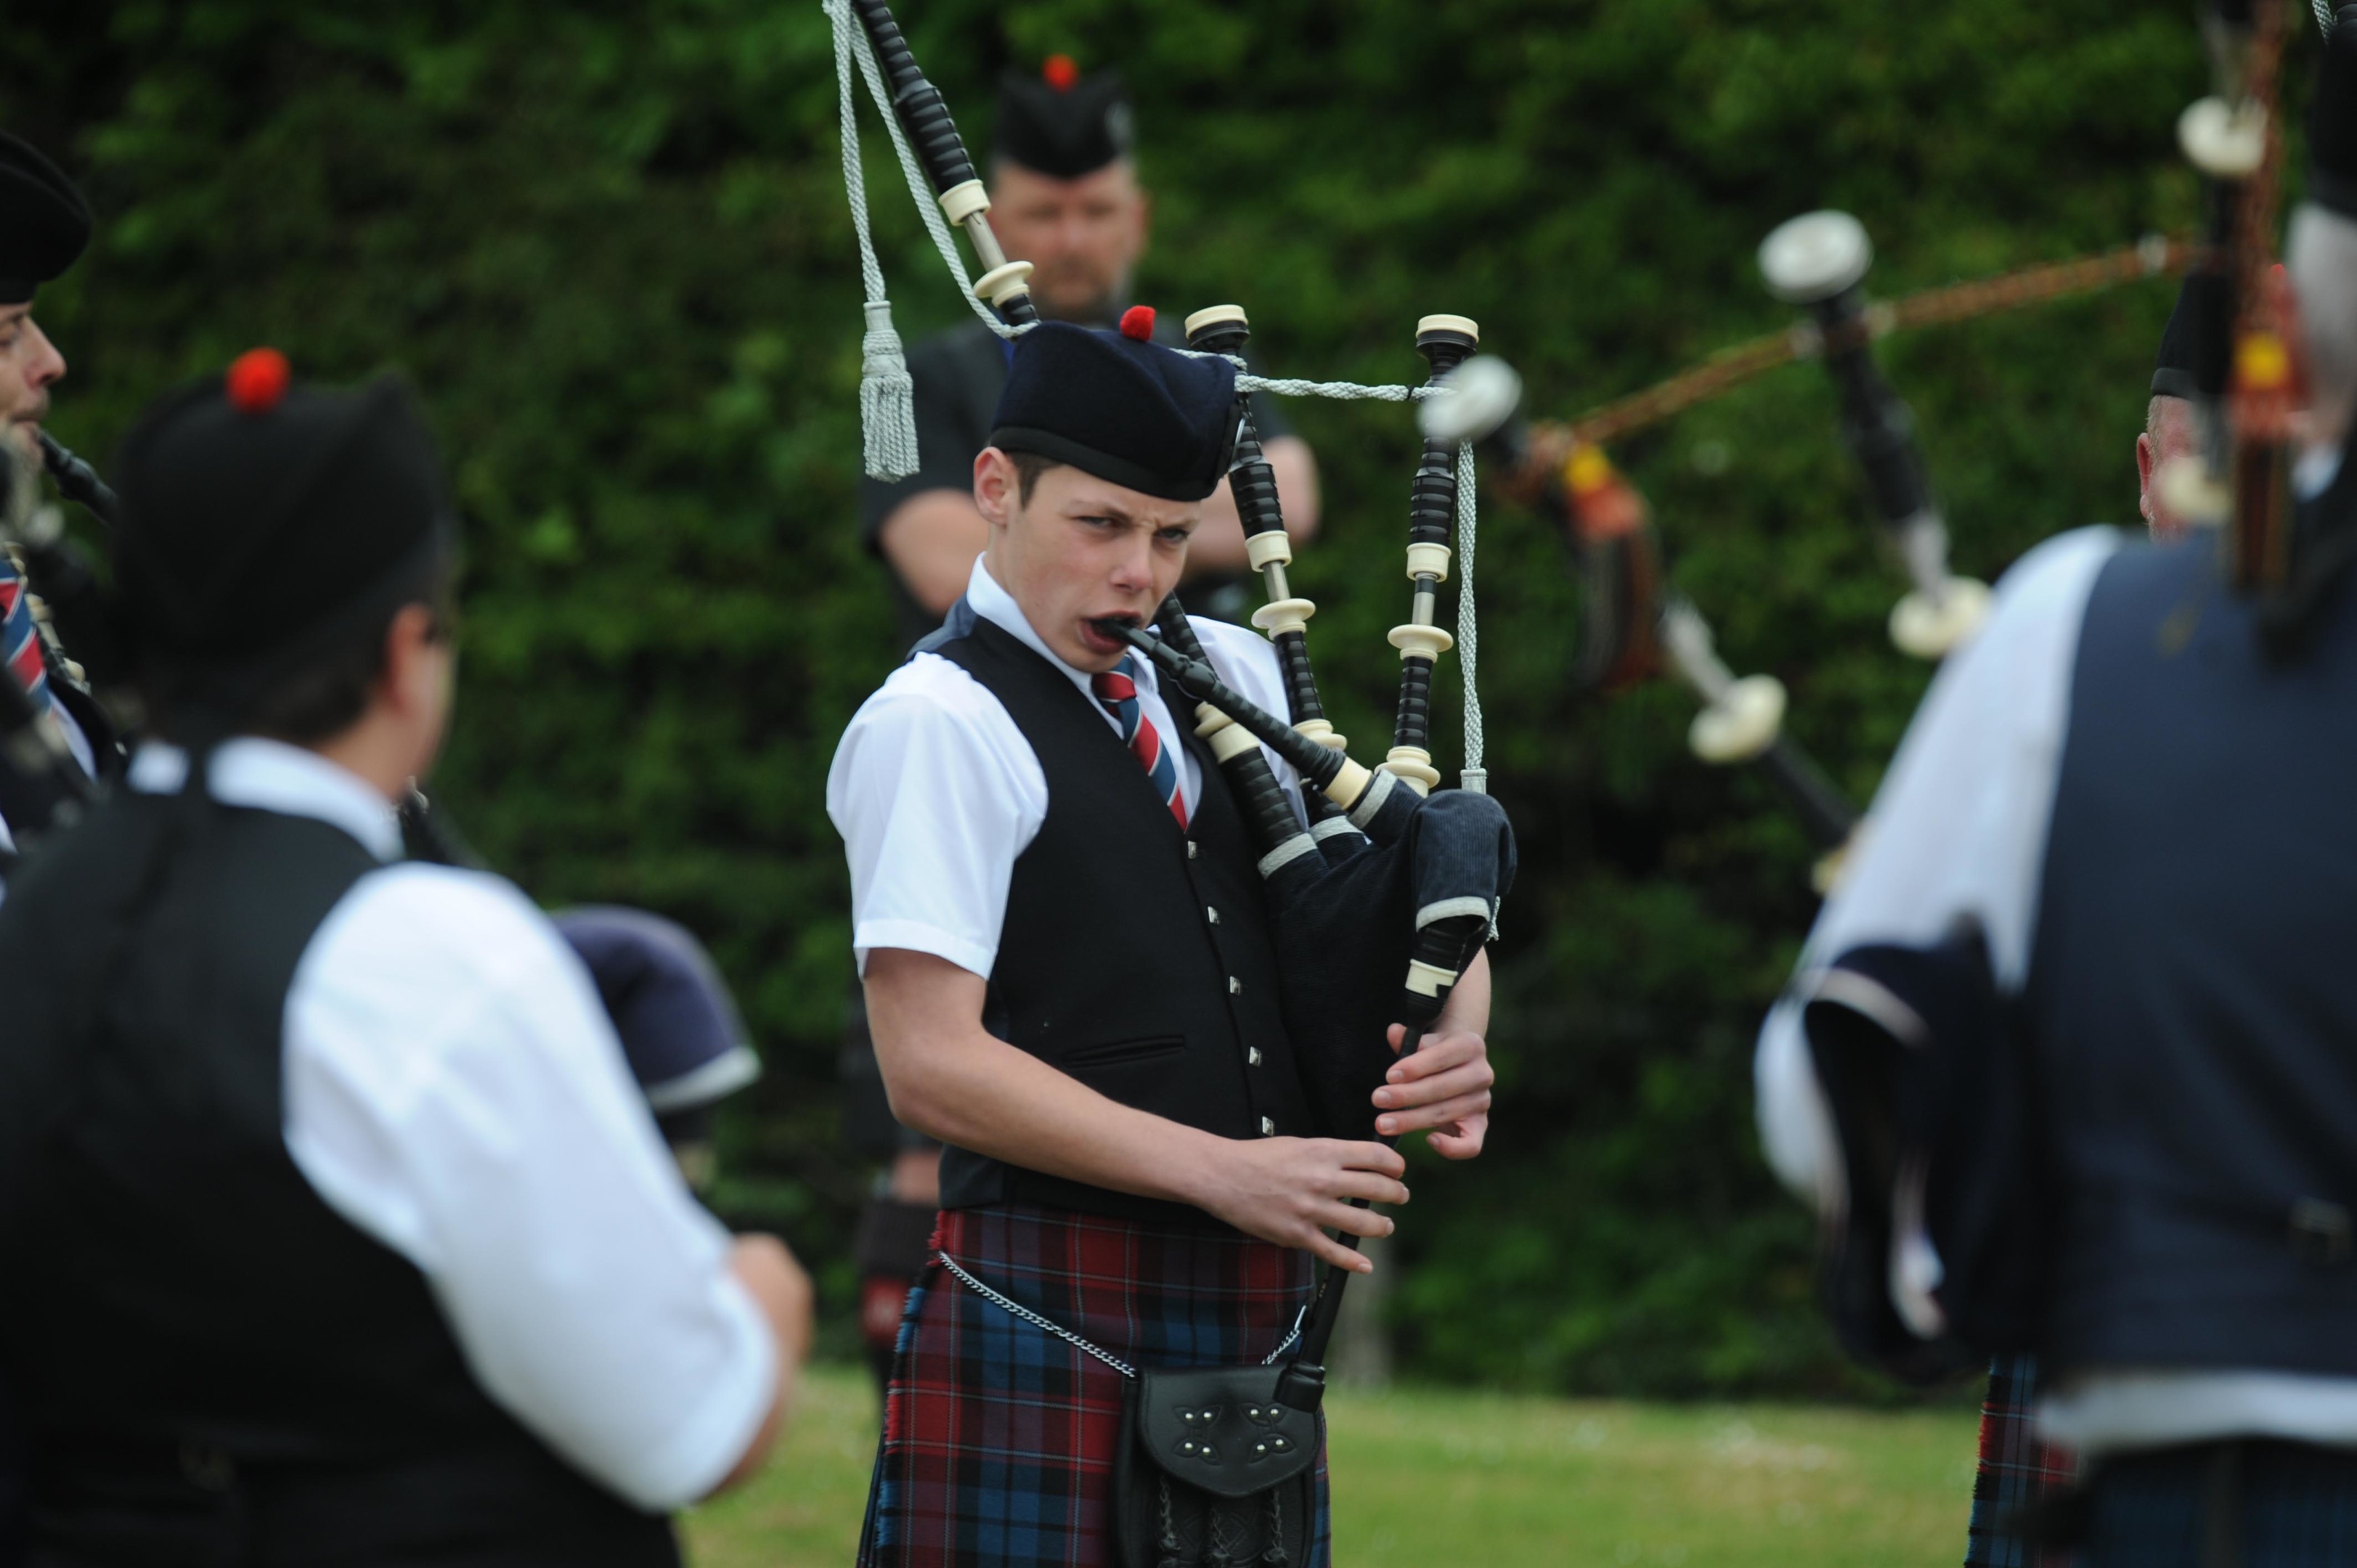 The pipe band contest was one of the highlights at Markinch.